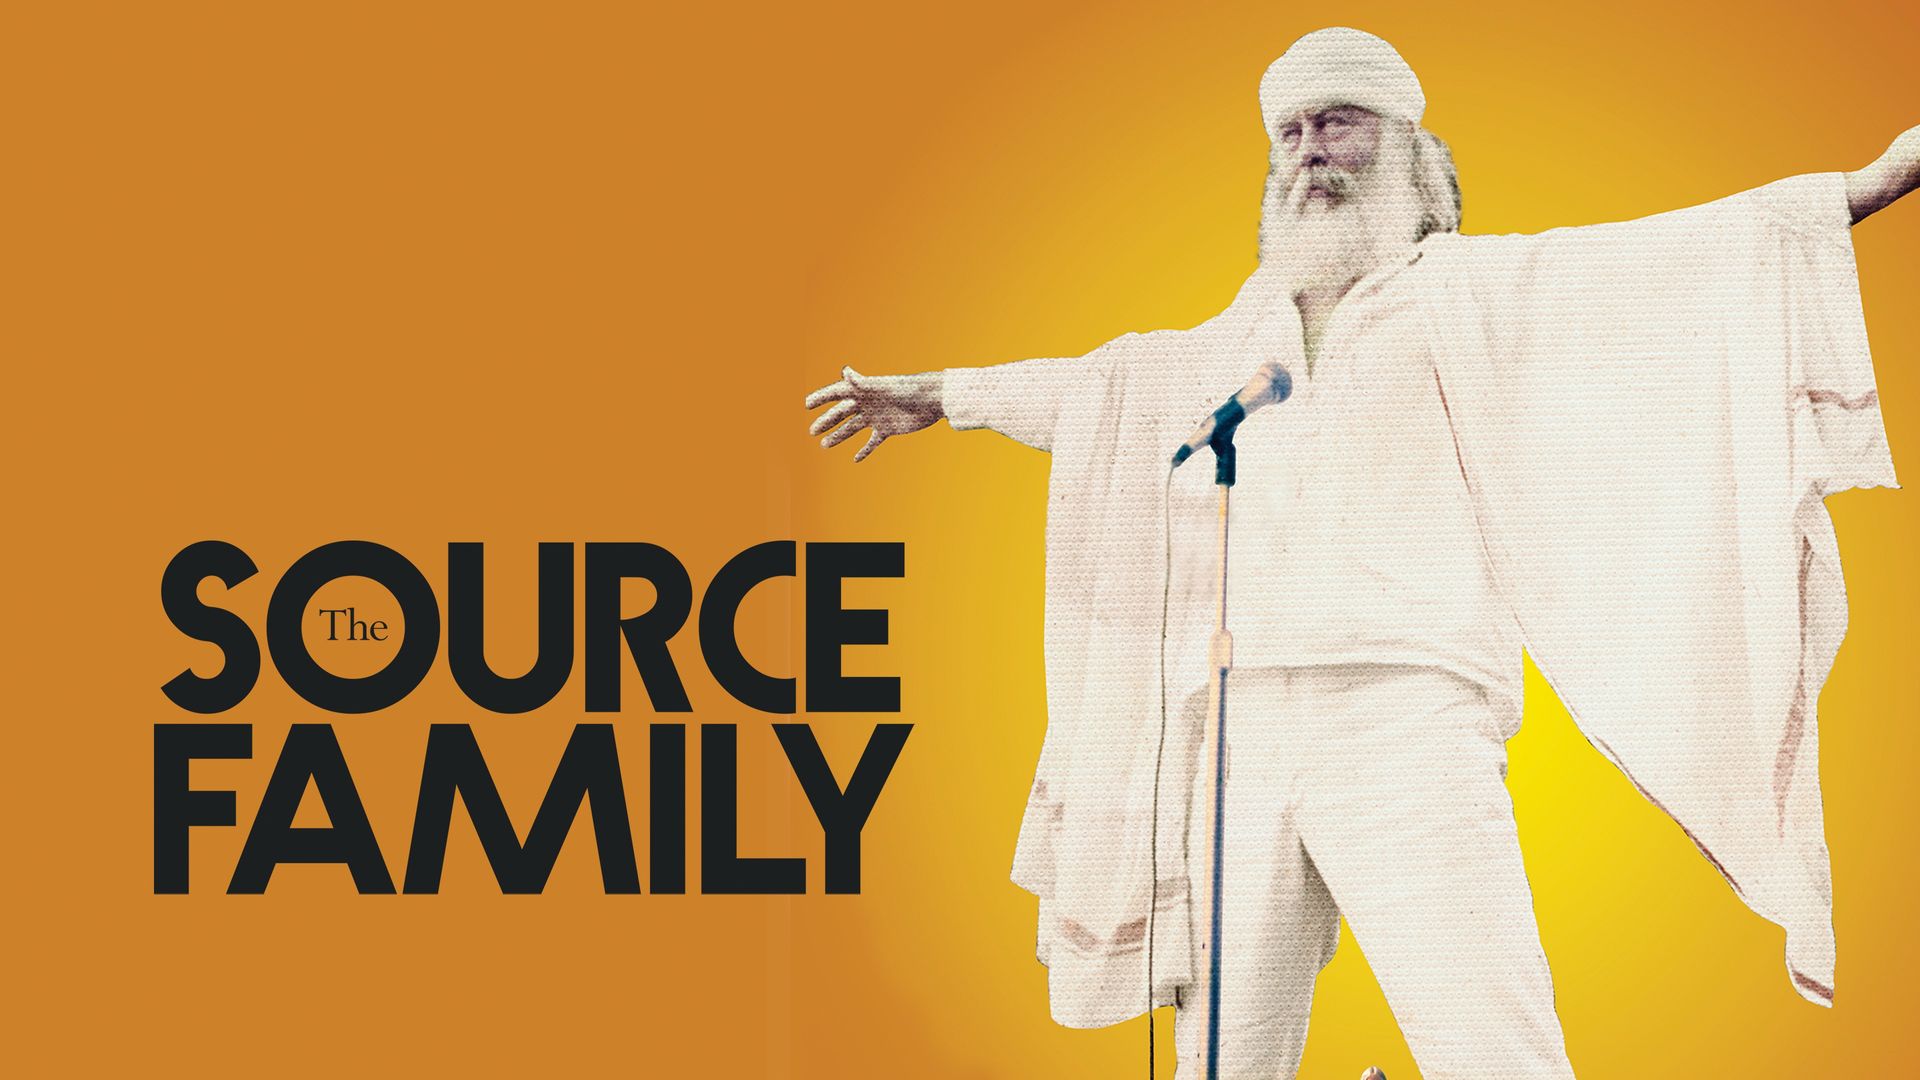 The Source Family Backdrop